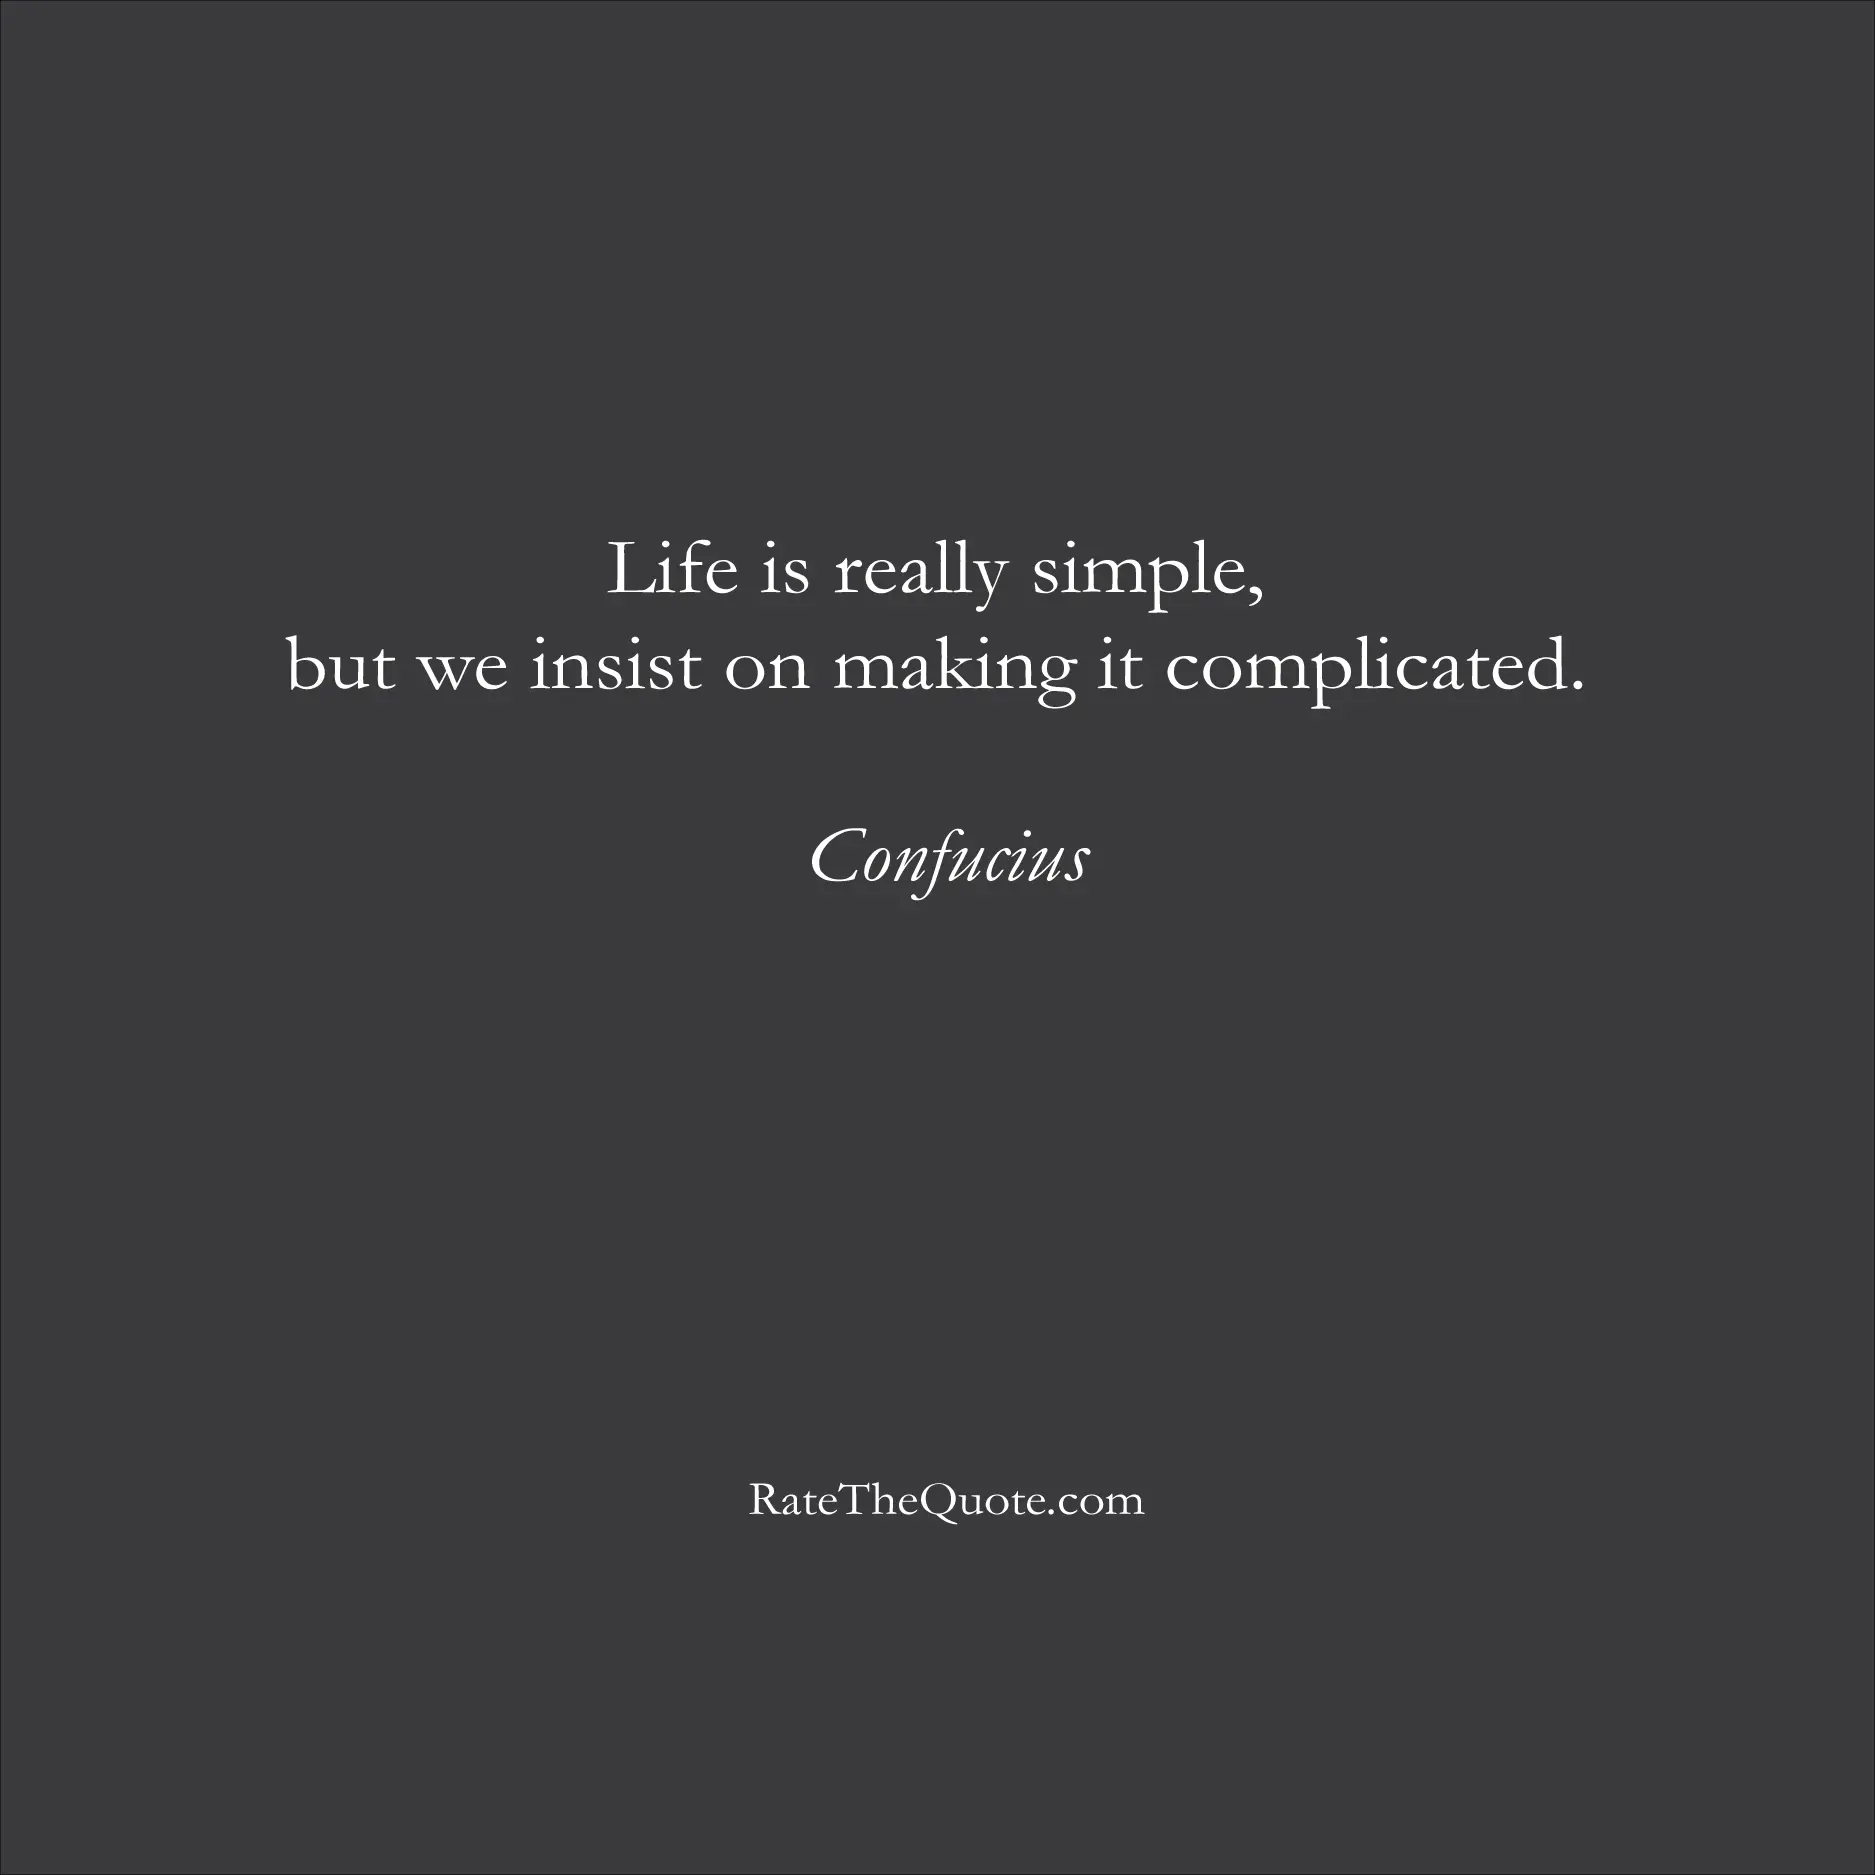 Life Quotes Life is really simple, but we insist on making it complicated. Confucius